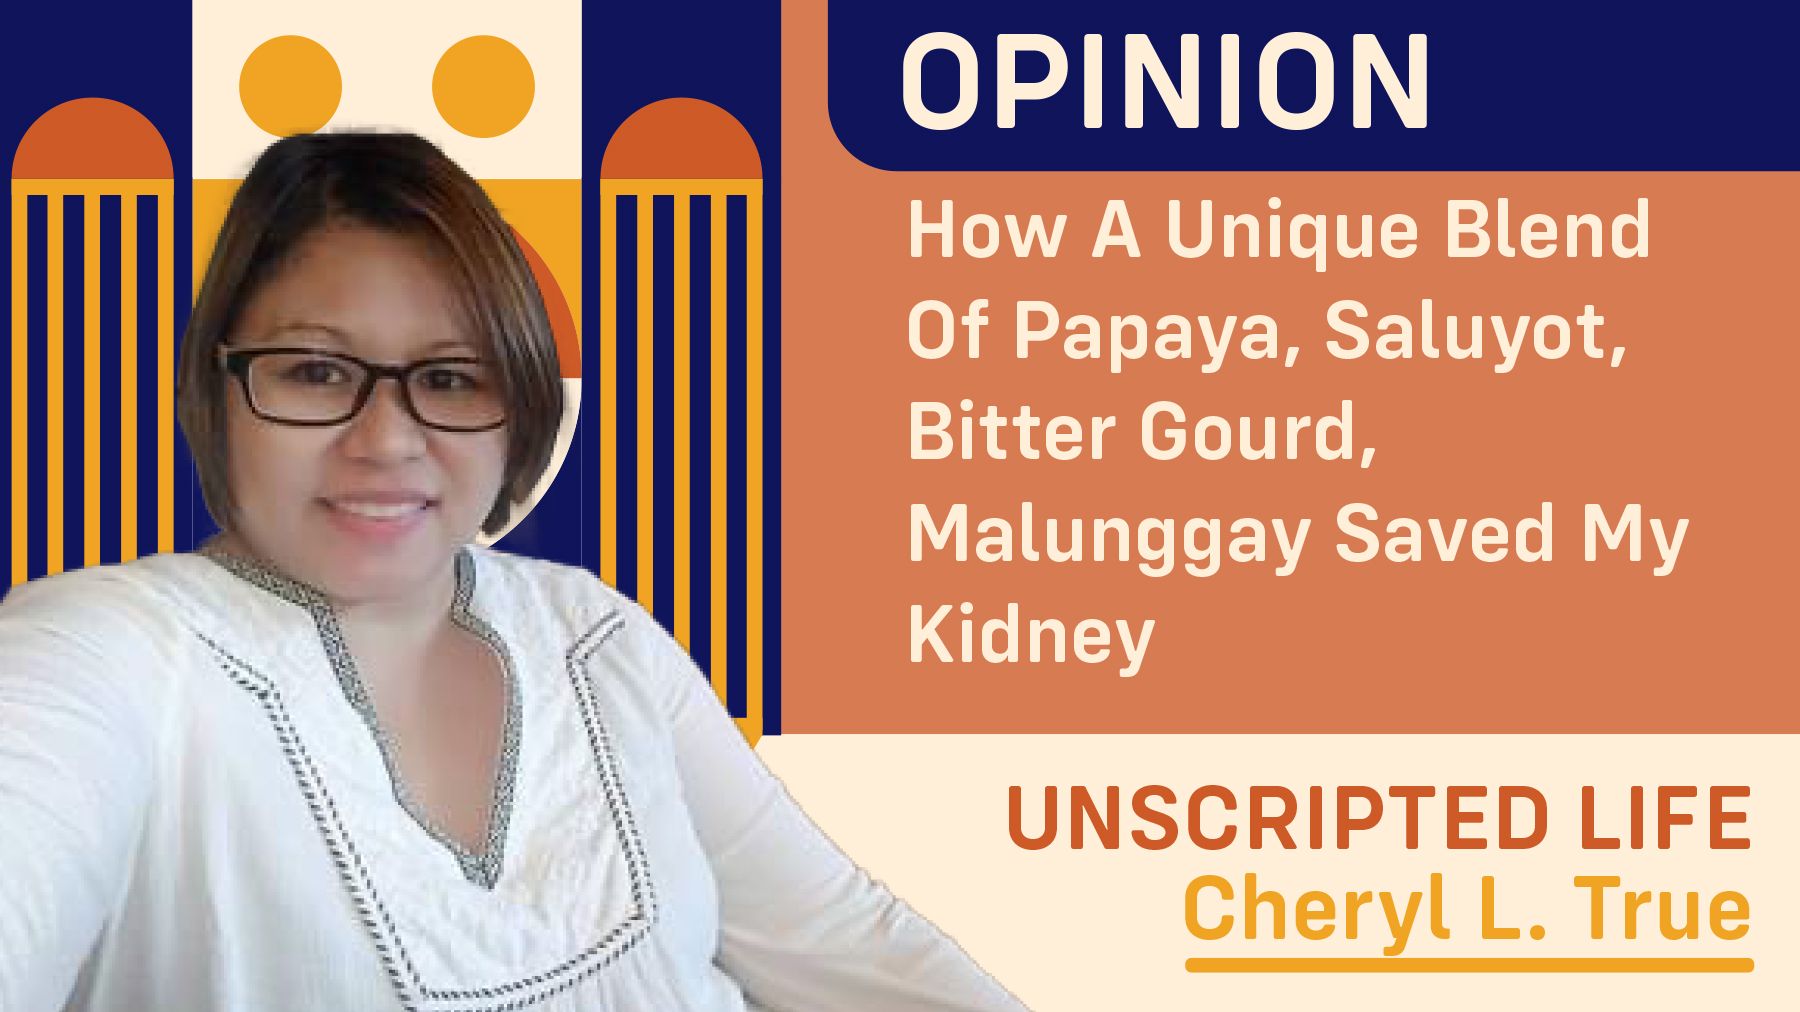 How A Unique Blend Of Papaya, Saluyot,  Bitter Gourd, Malunggay Saved My Kidney